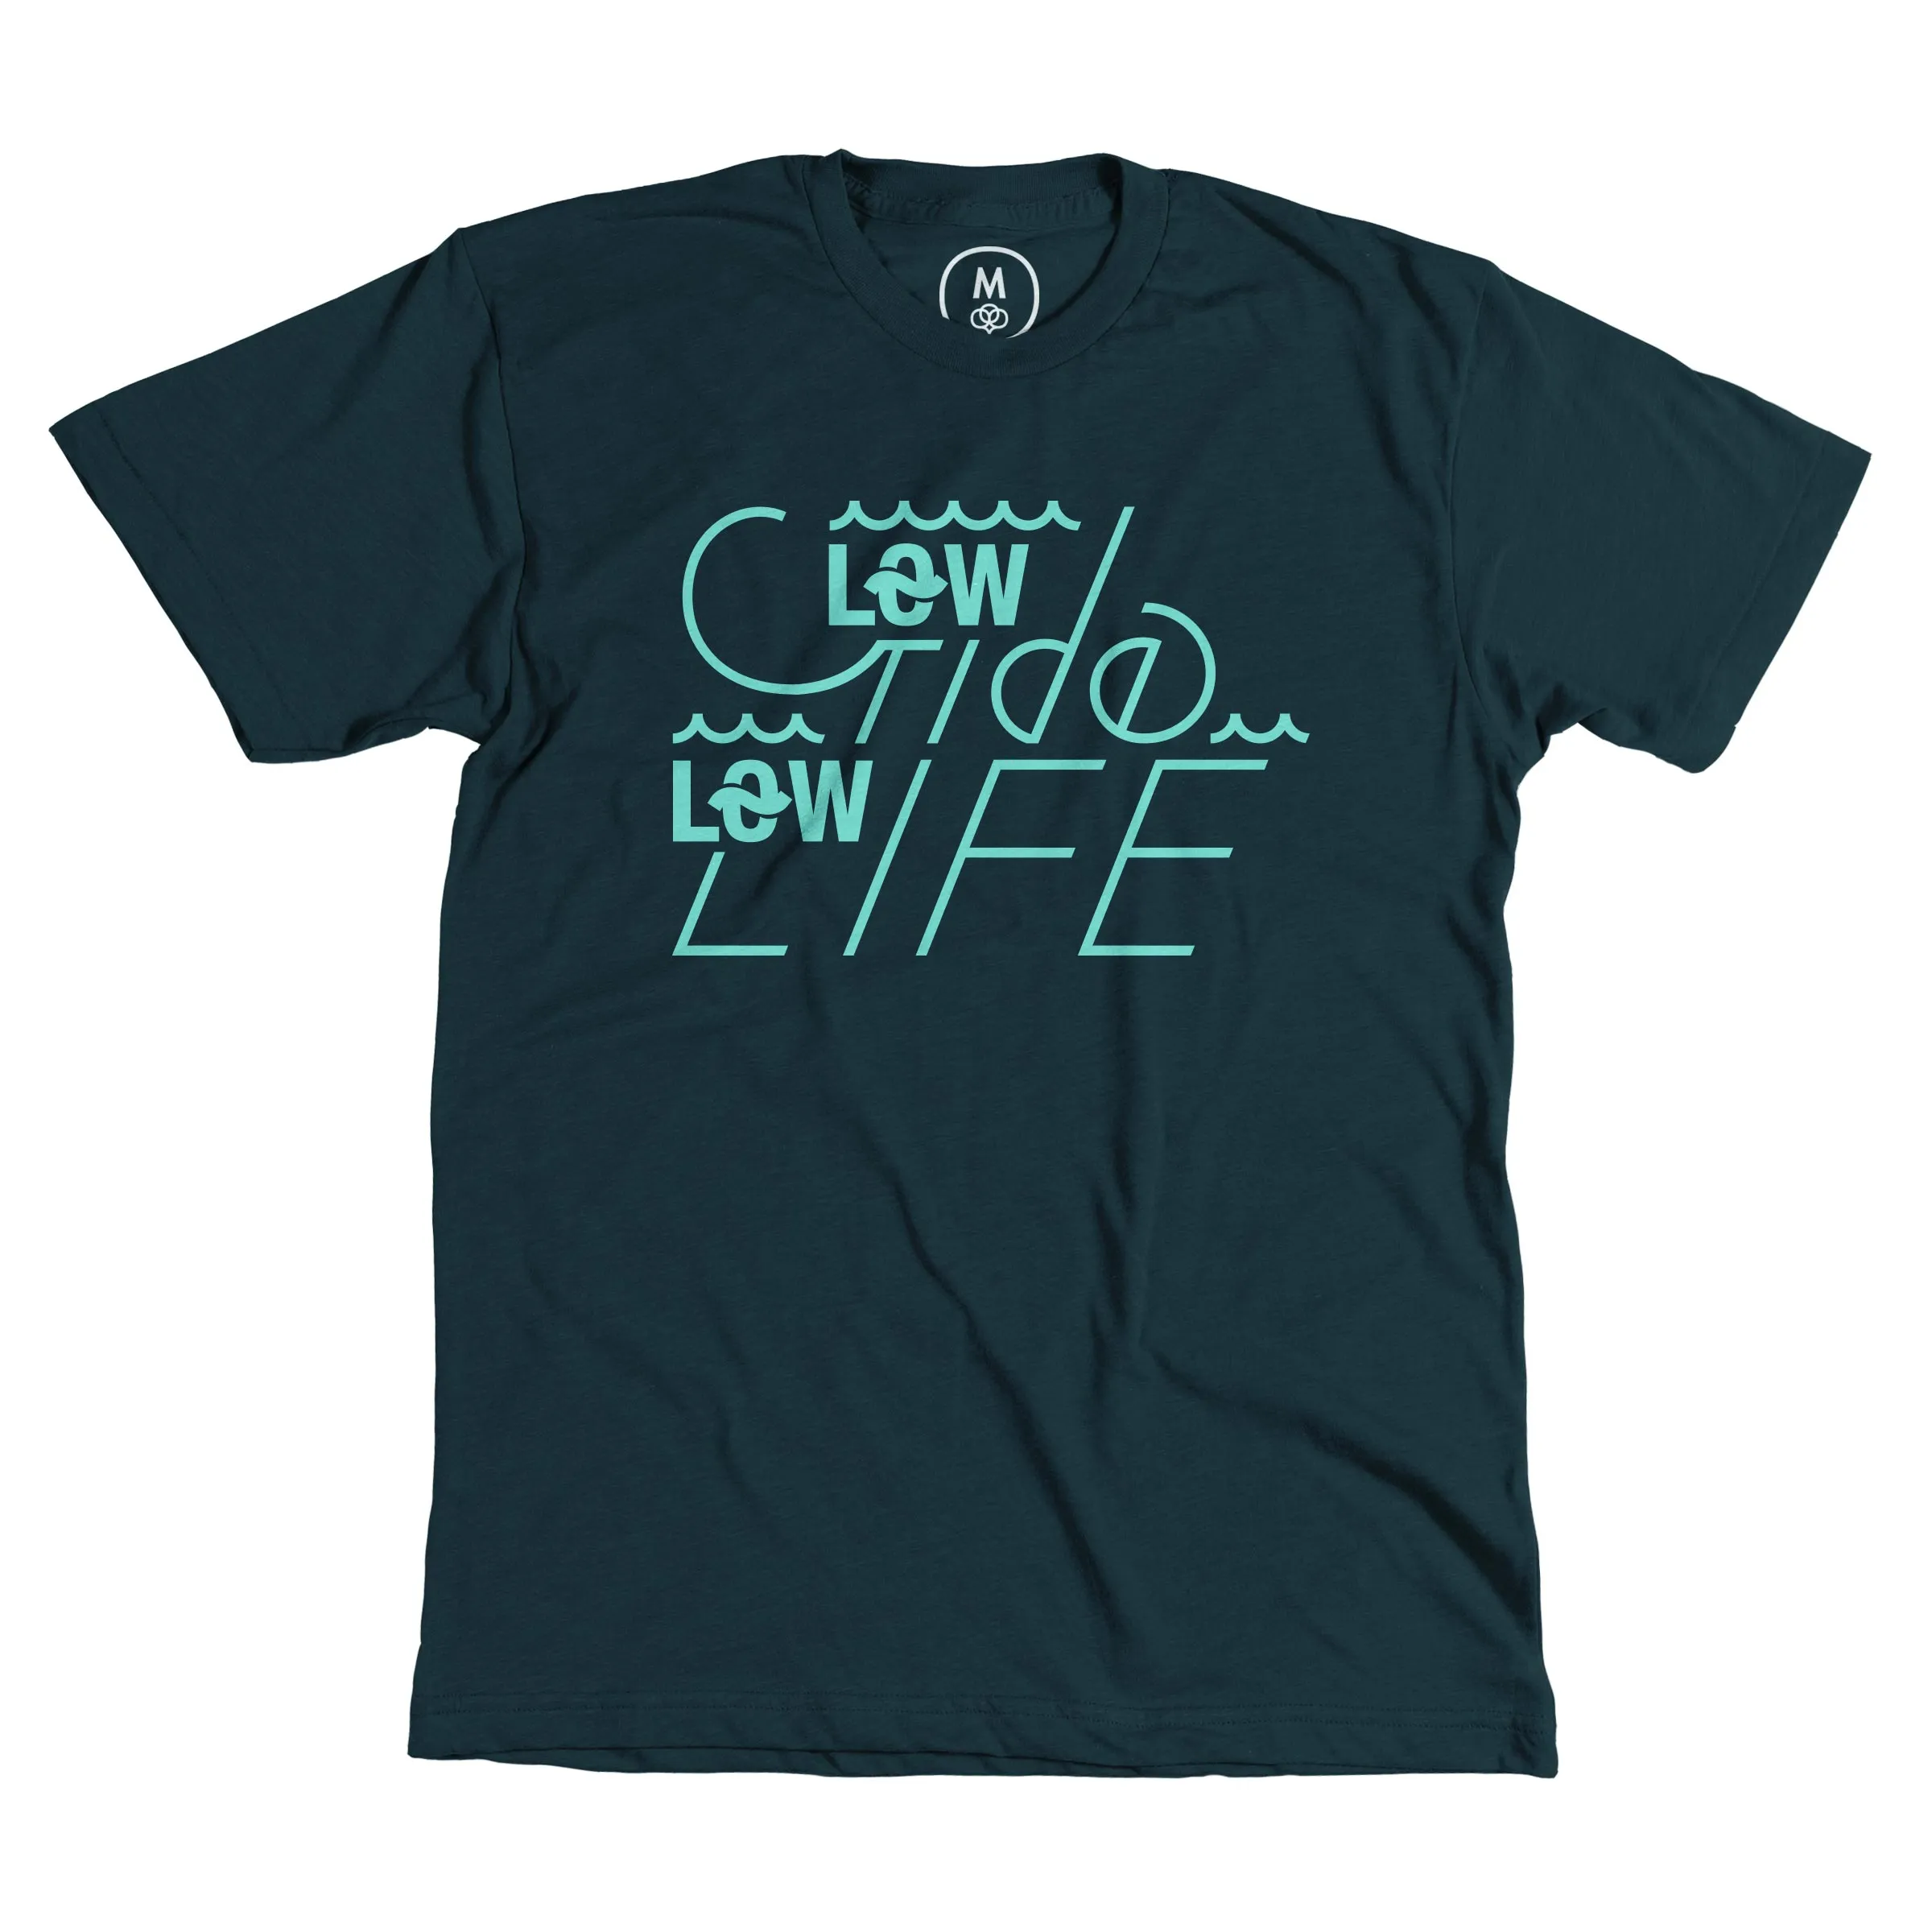 Low Tide Low Life” graphic tee by matthew snell.